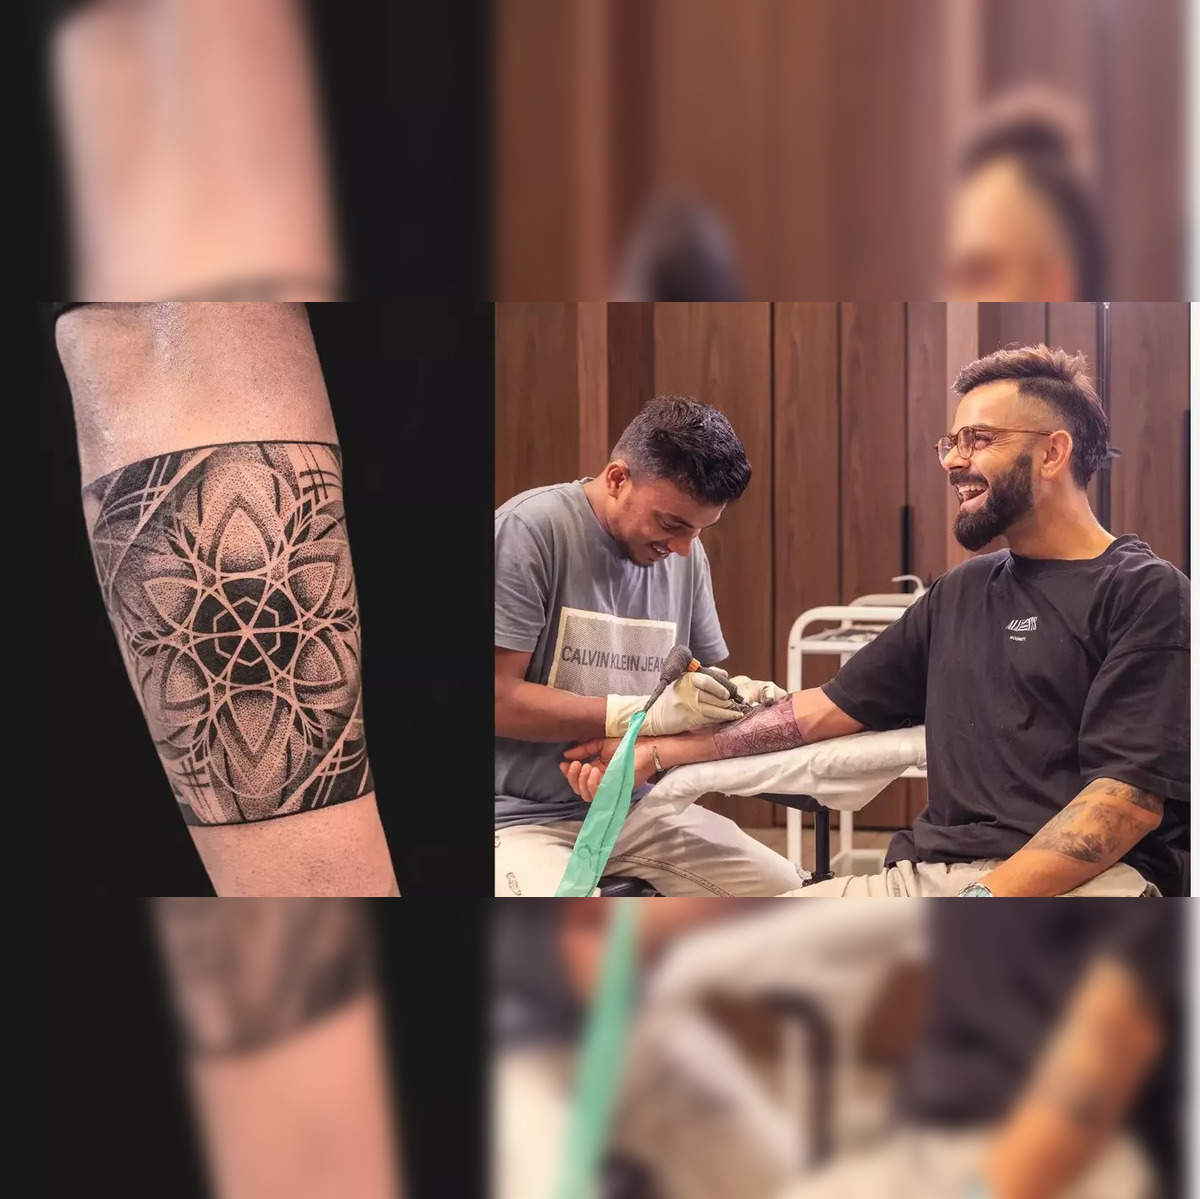 Virat Kohli and other Indian cricketers with eye-catching tattoos |  Photogallery - ETimes